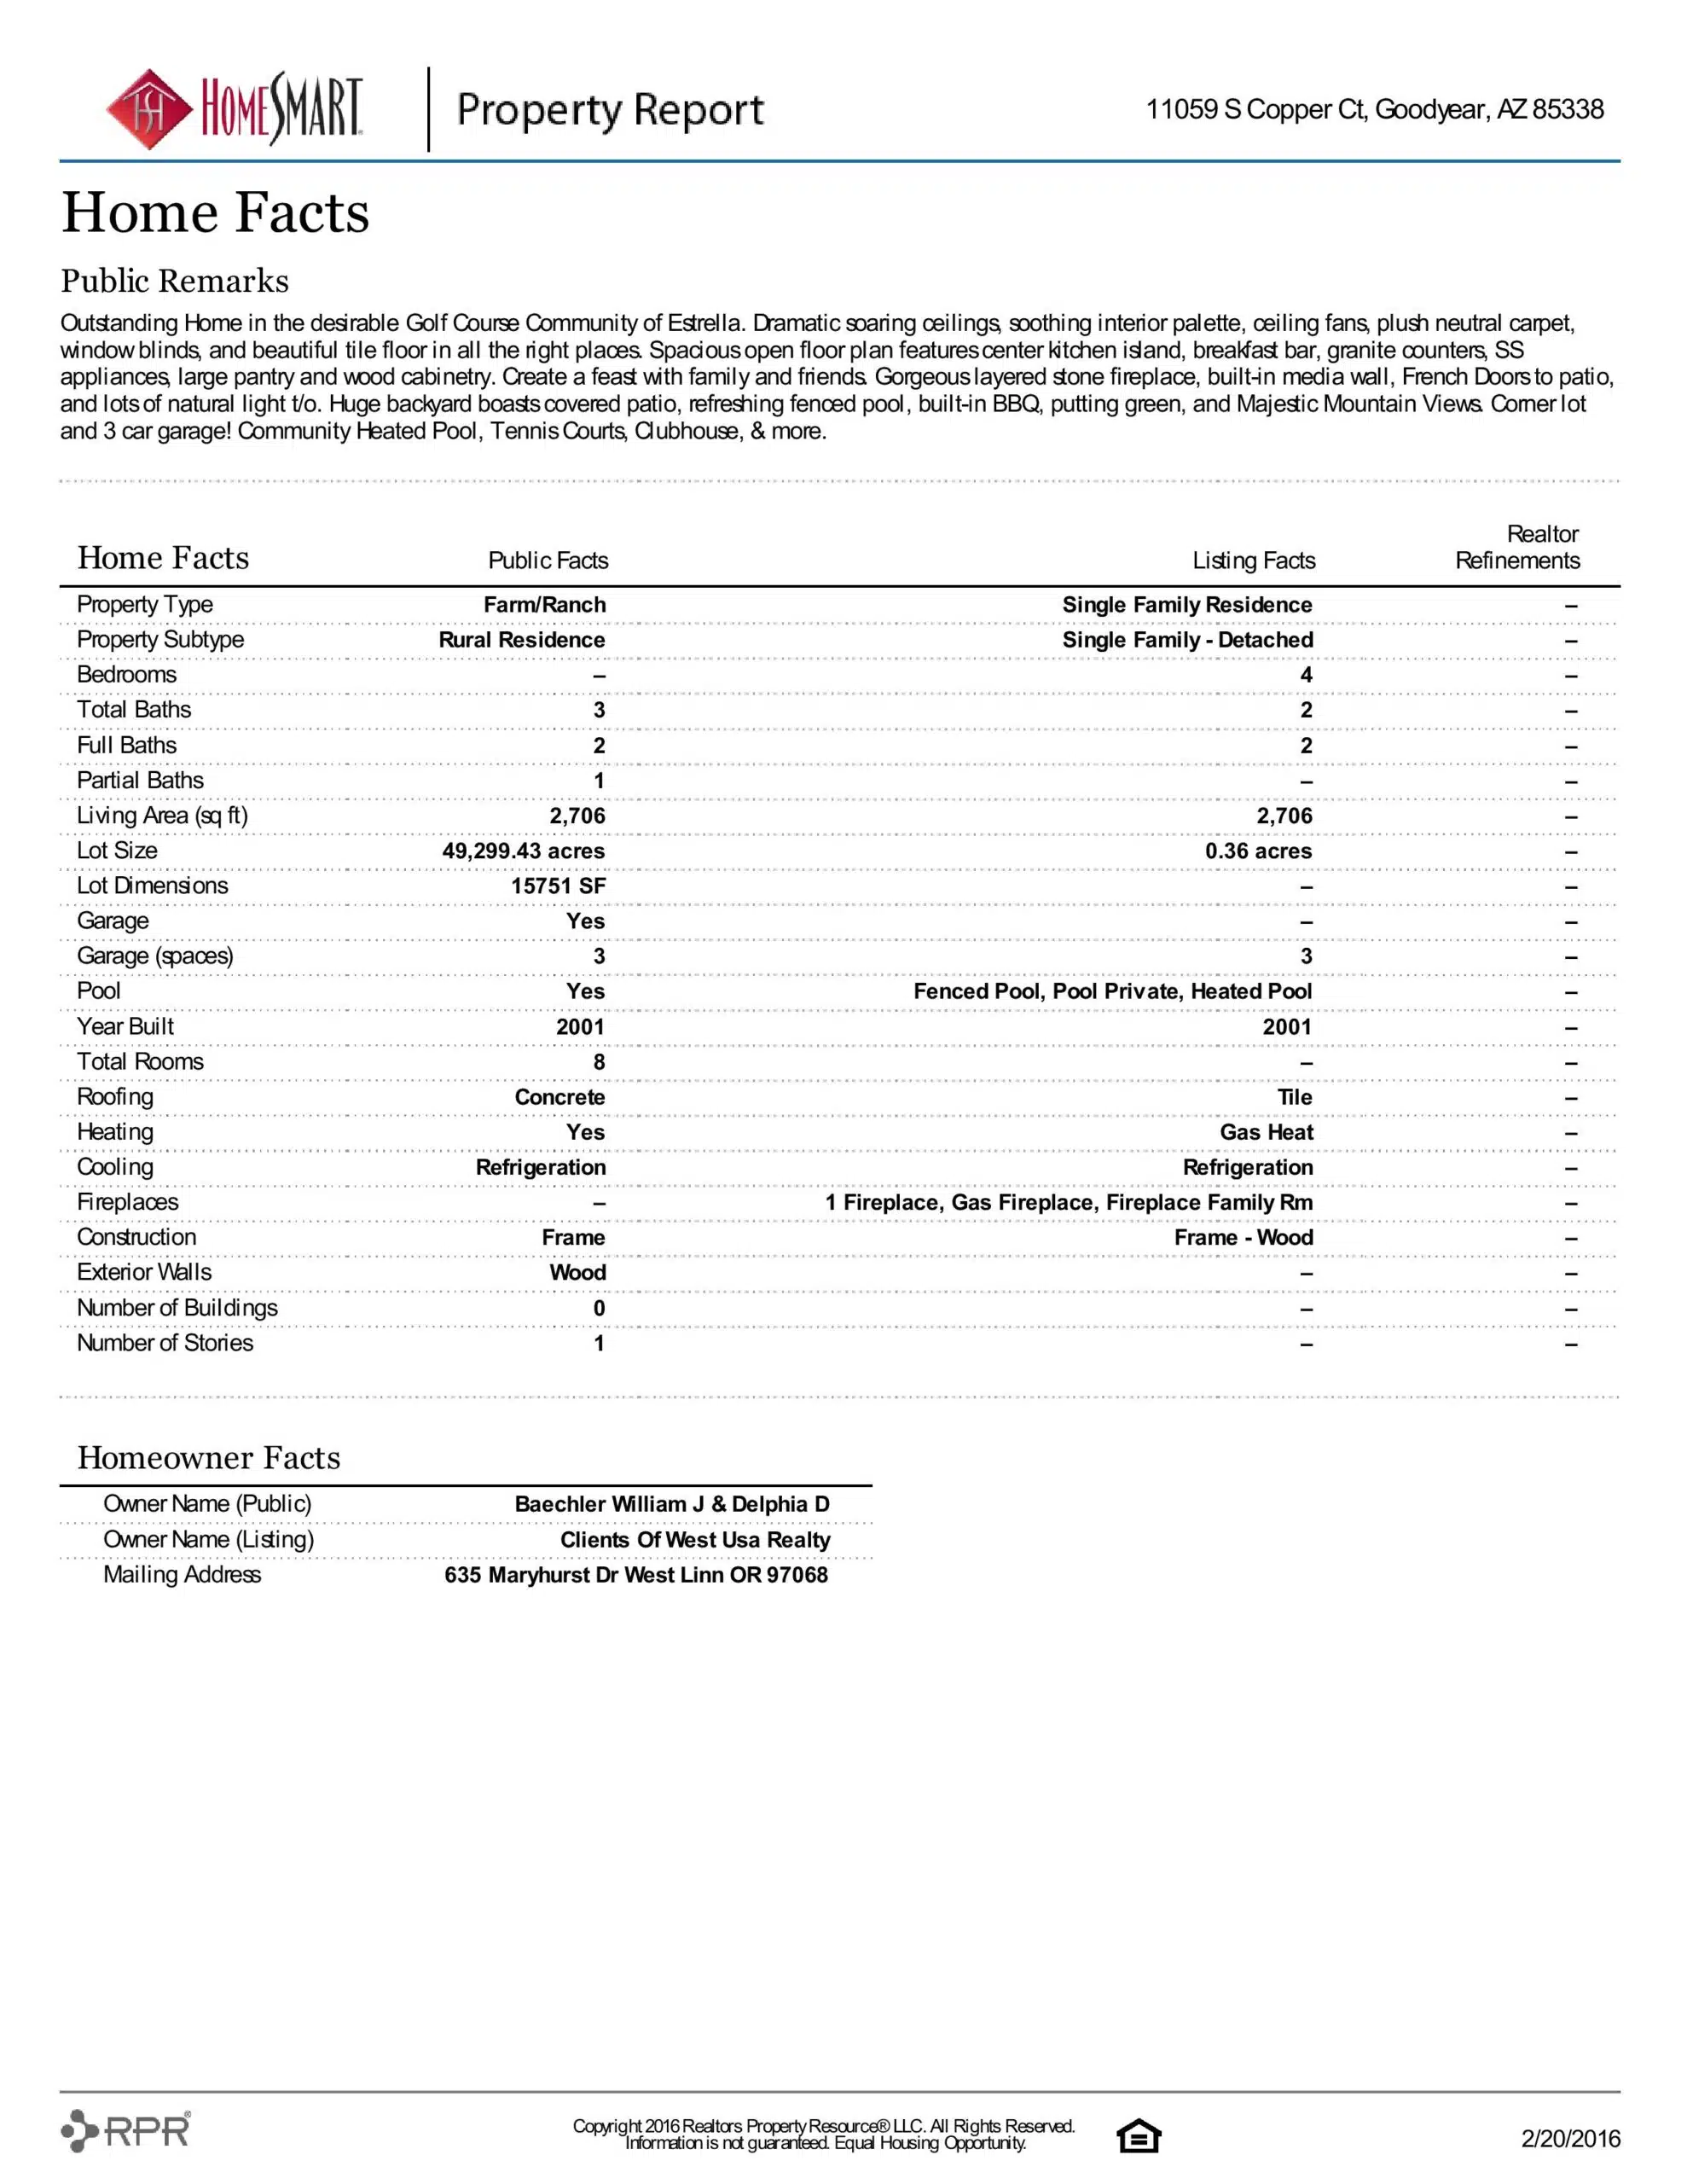 11059 S COPPER CT PROPERTY REPORT-page-003